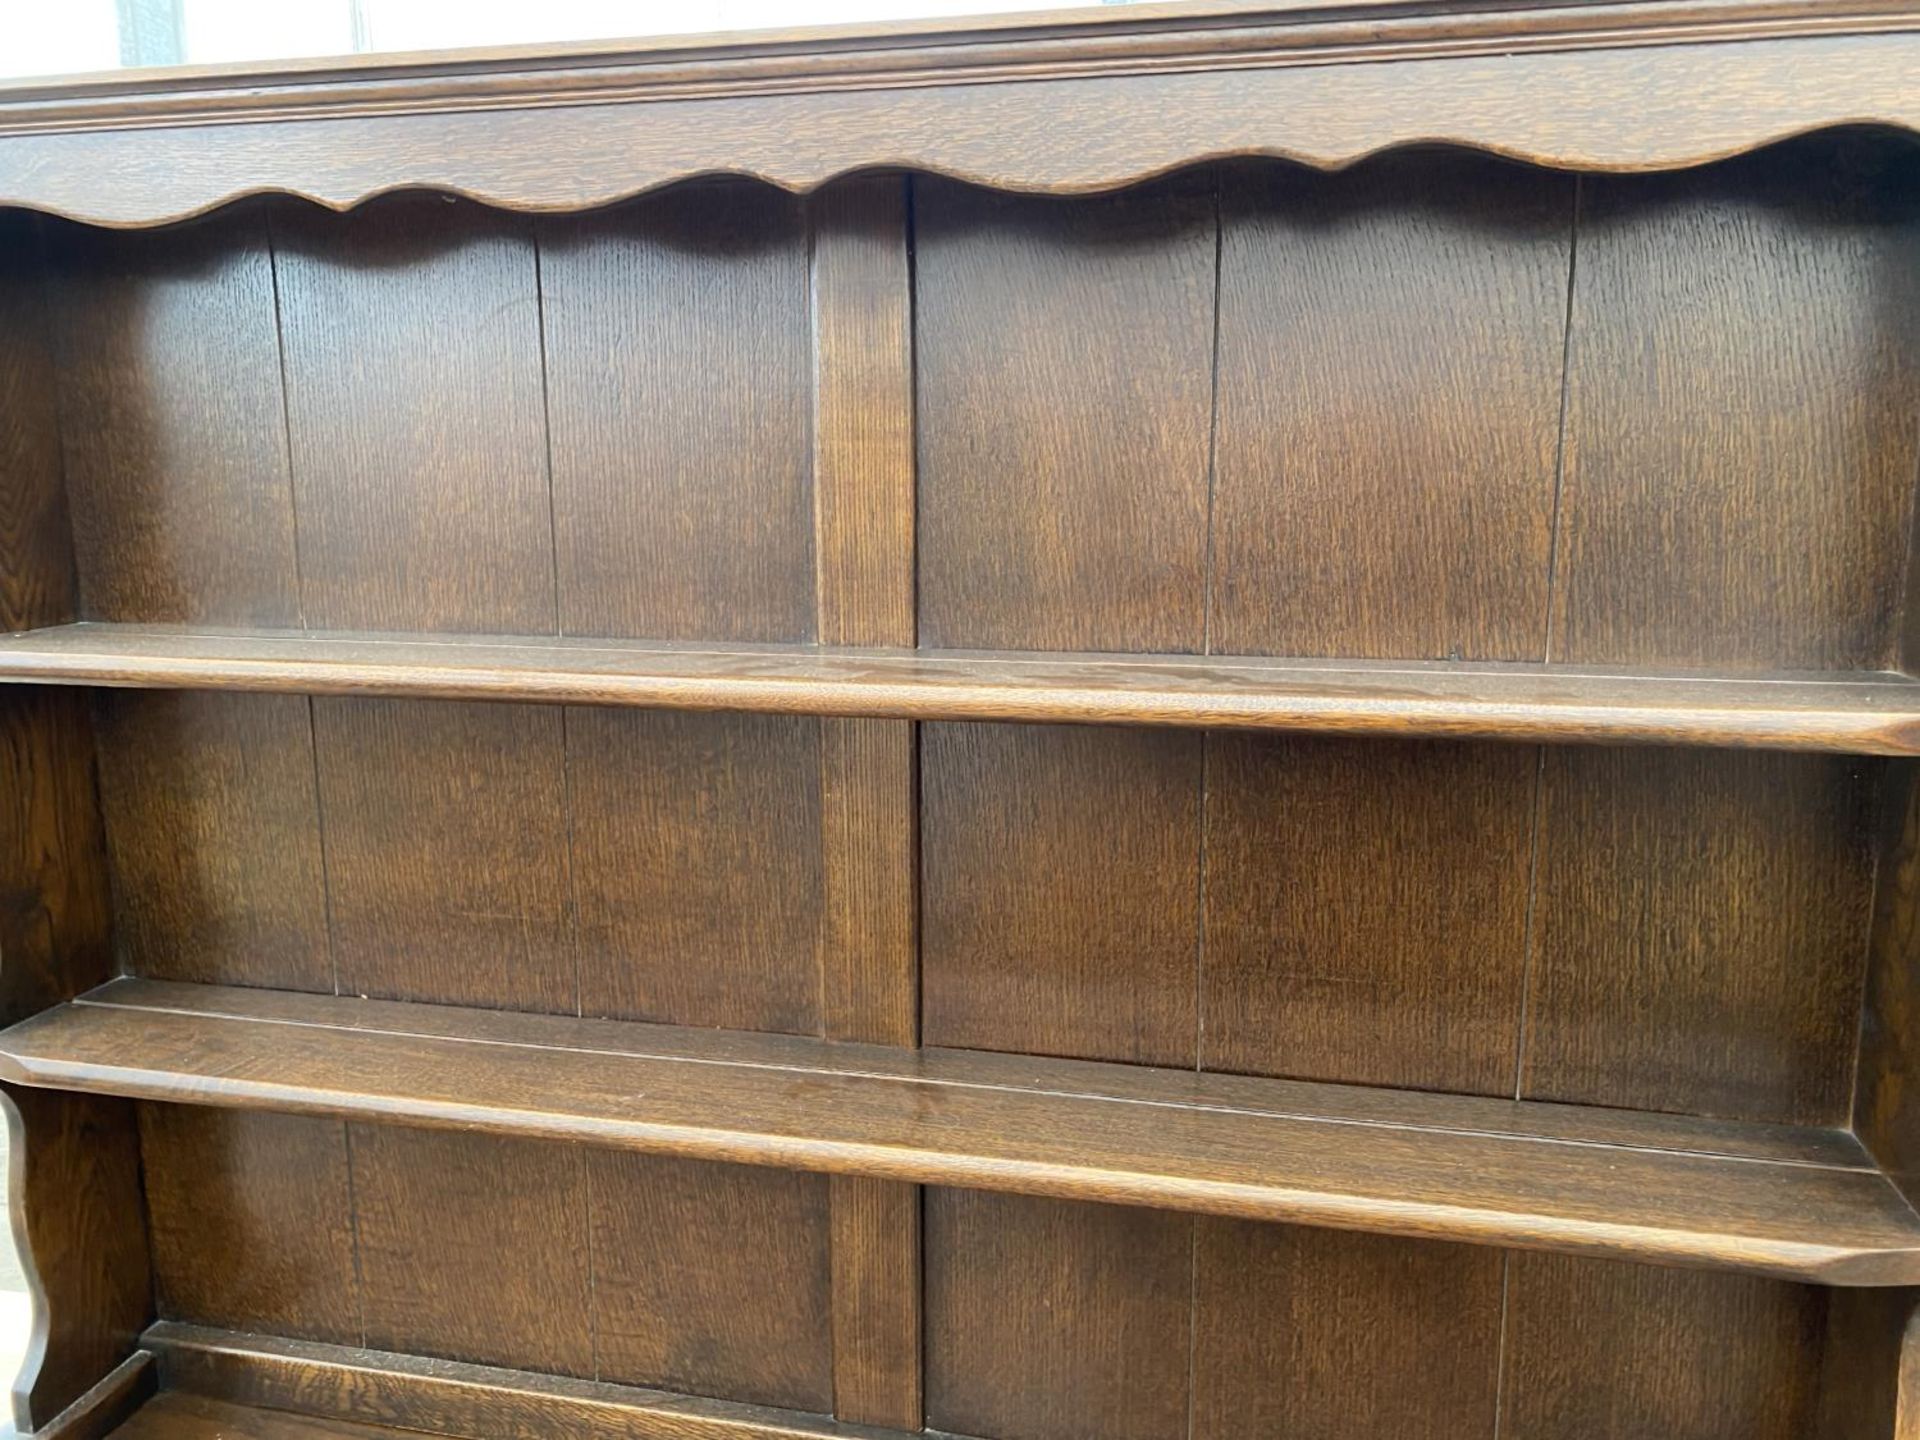 A PRIORY STYLE OAK DRESSER WITH TWO DOORS, TWO DRAWERS AND UPPER PLATE RACK - Image 2 of 4